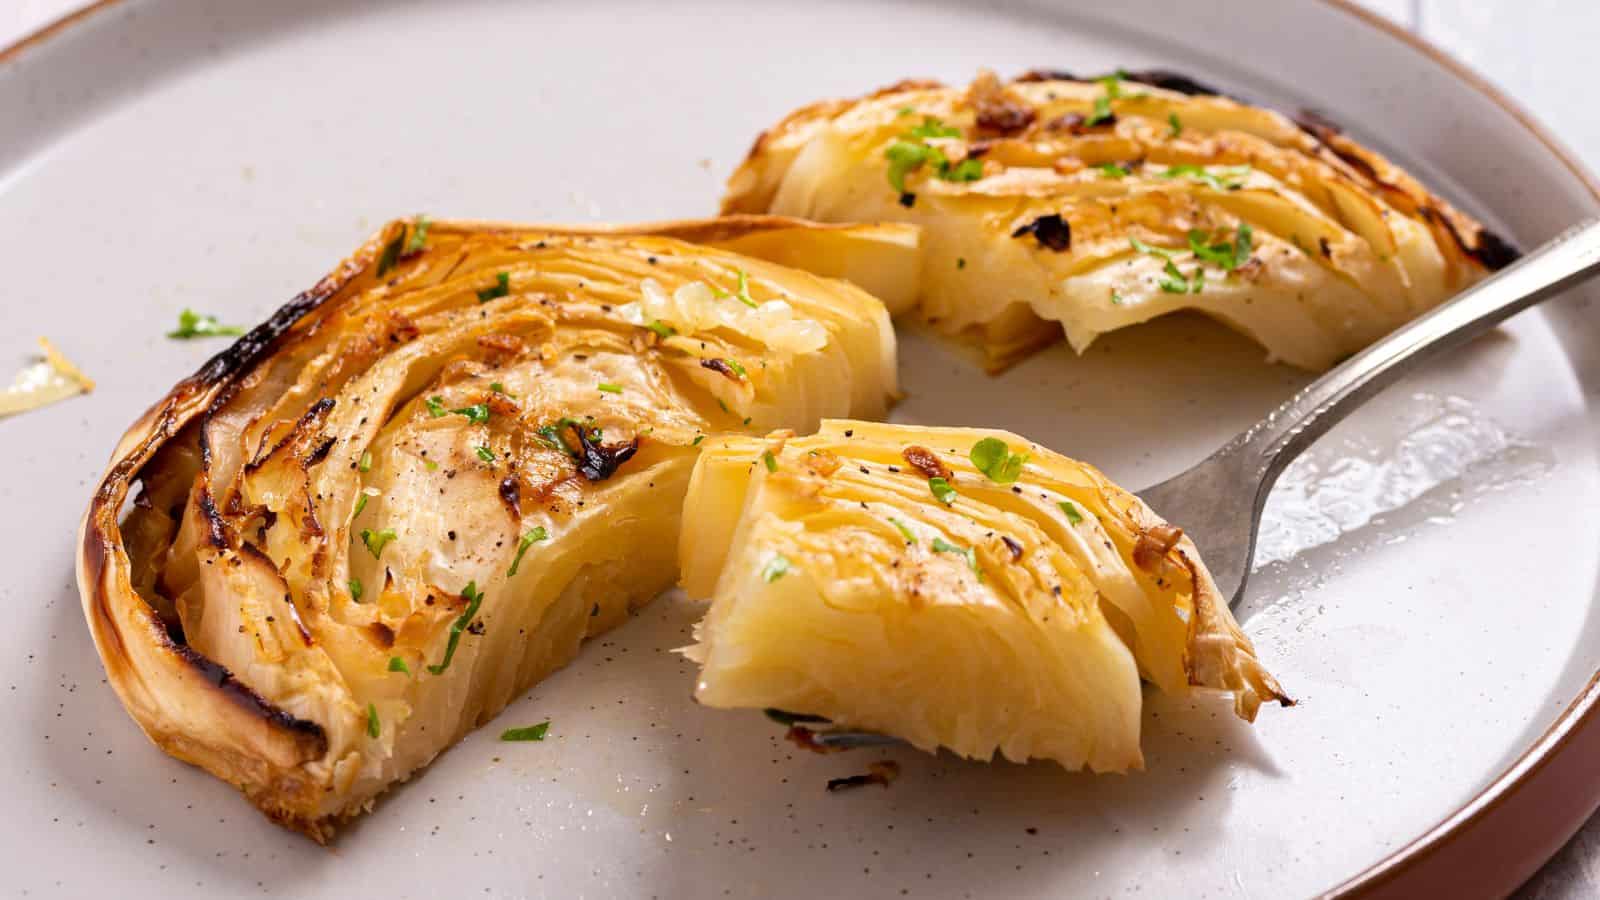 Sliced and roasted cabbage wedges seasoned with herbs on a white plate, garnished with black pepper and fresh herbs.